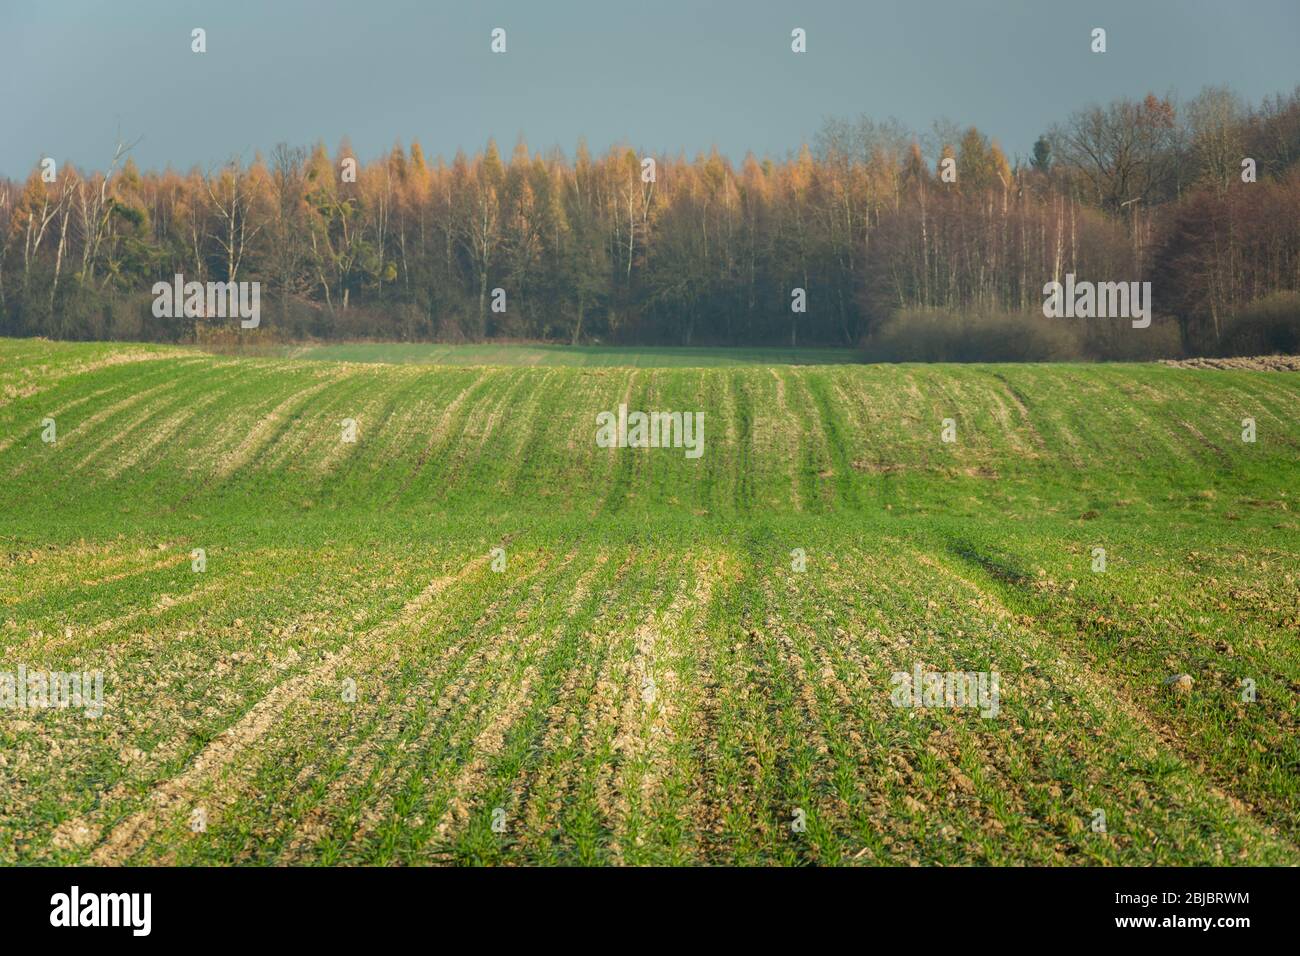 Growth on a green hilly field, autumn forest and blue sky, focus in the foreground, Zarzecze, Poland Stock Photo